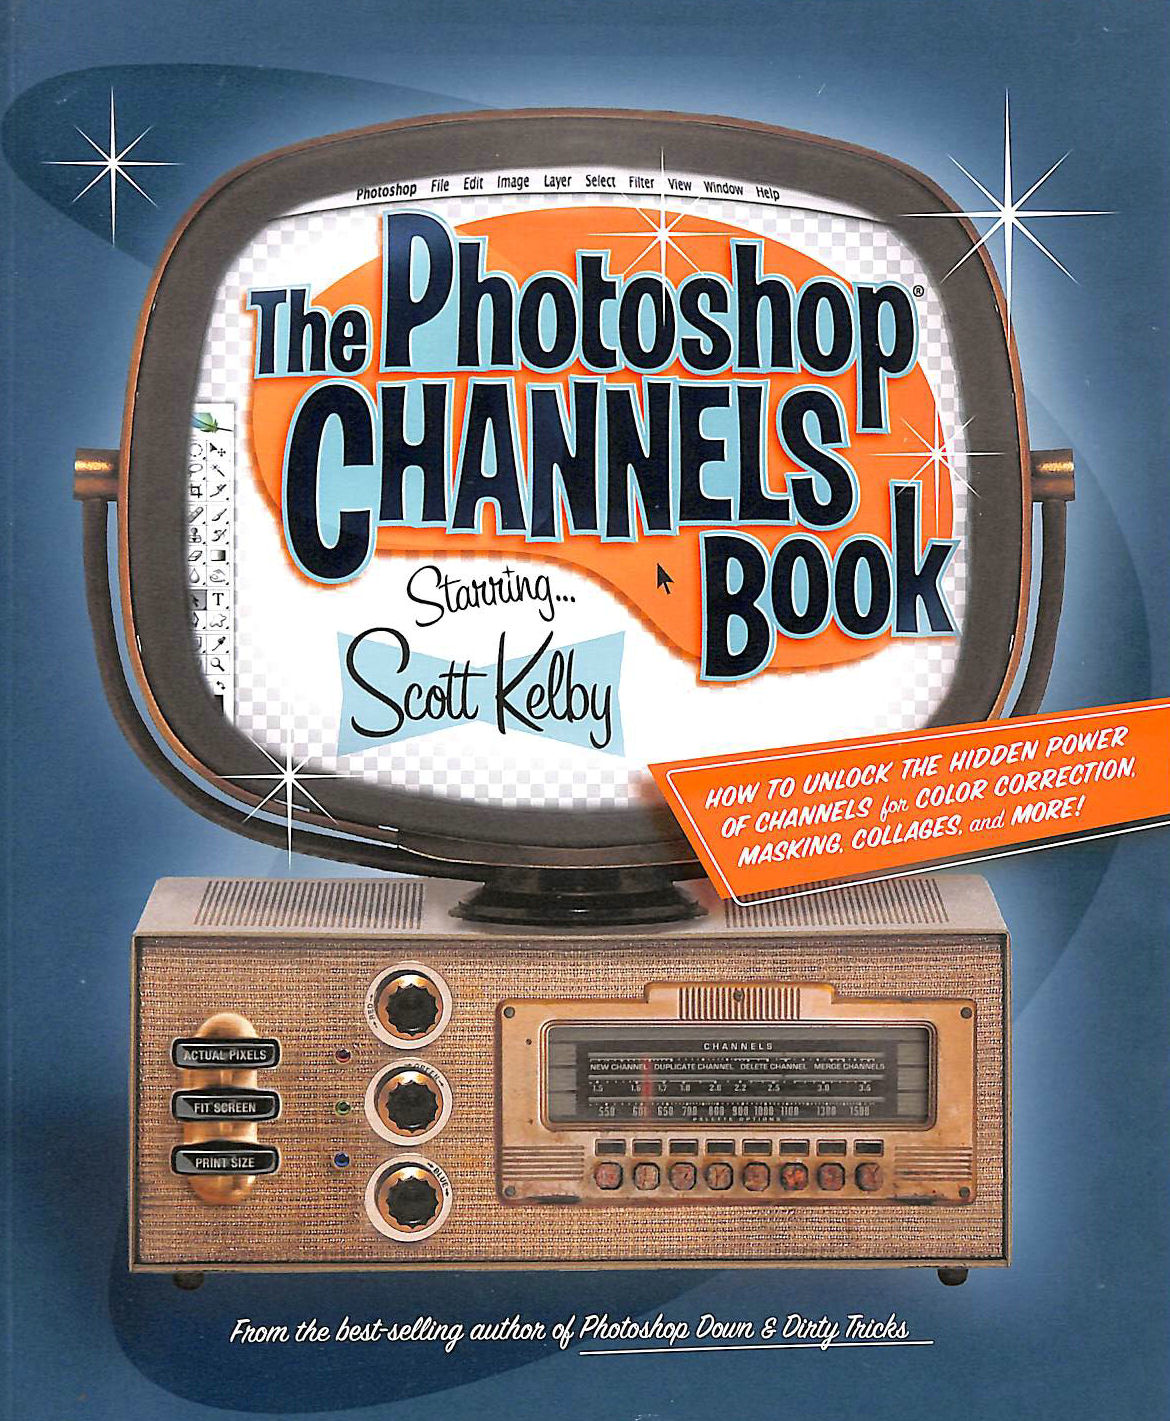 KELBY, SCOTT - The Photoshop Channels Book